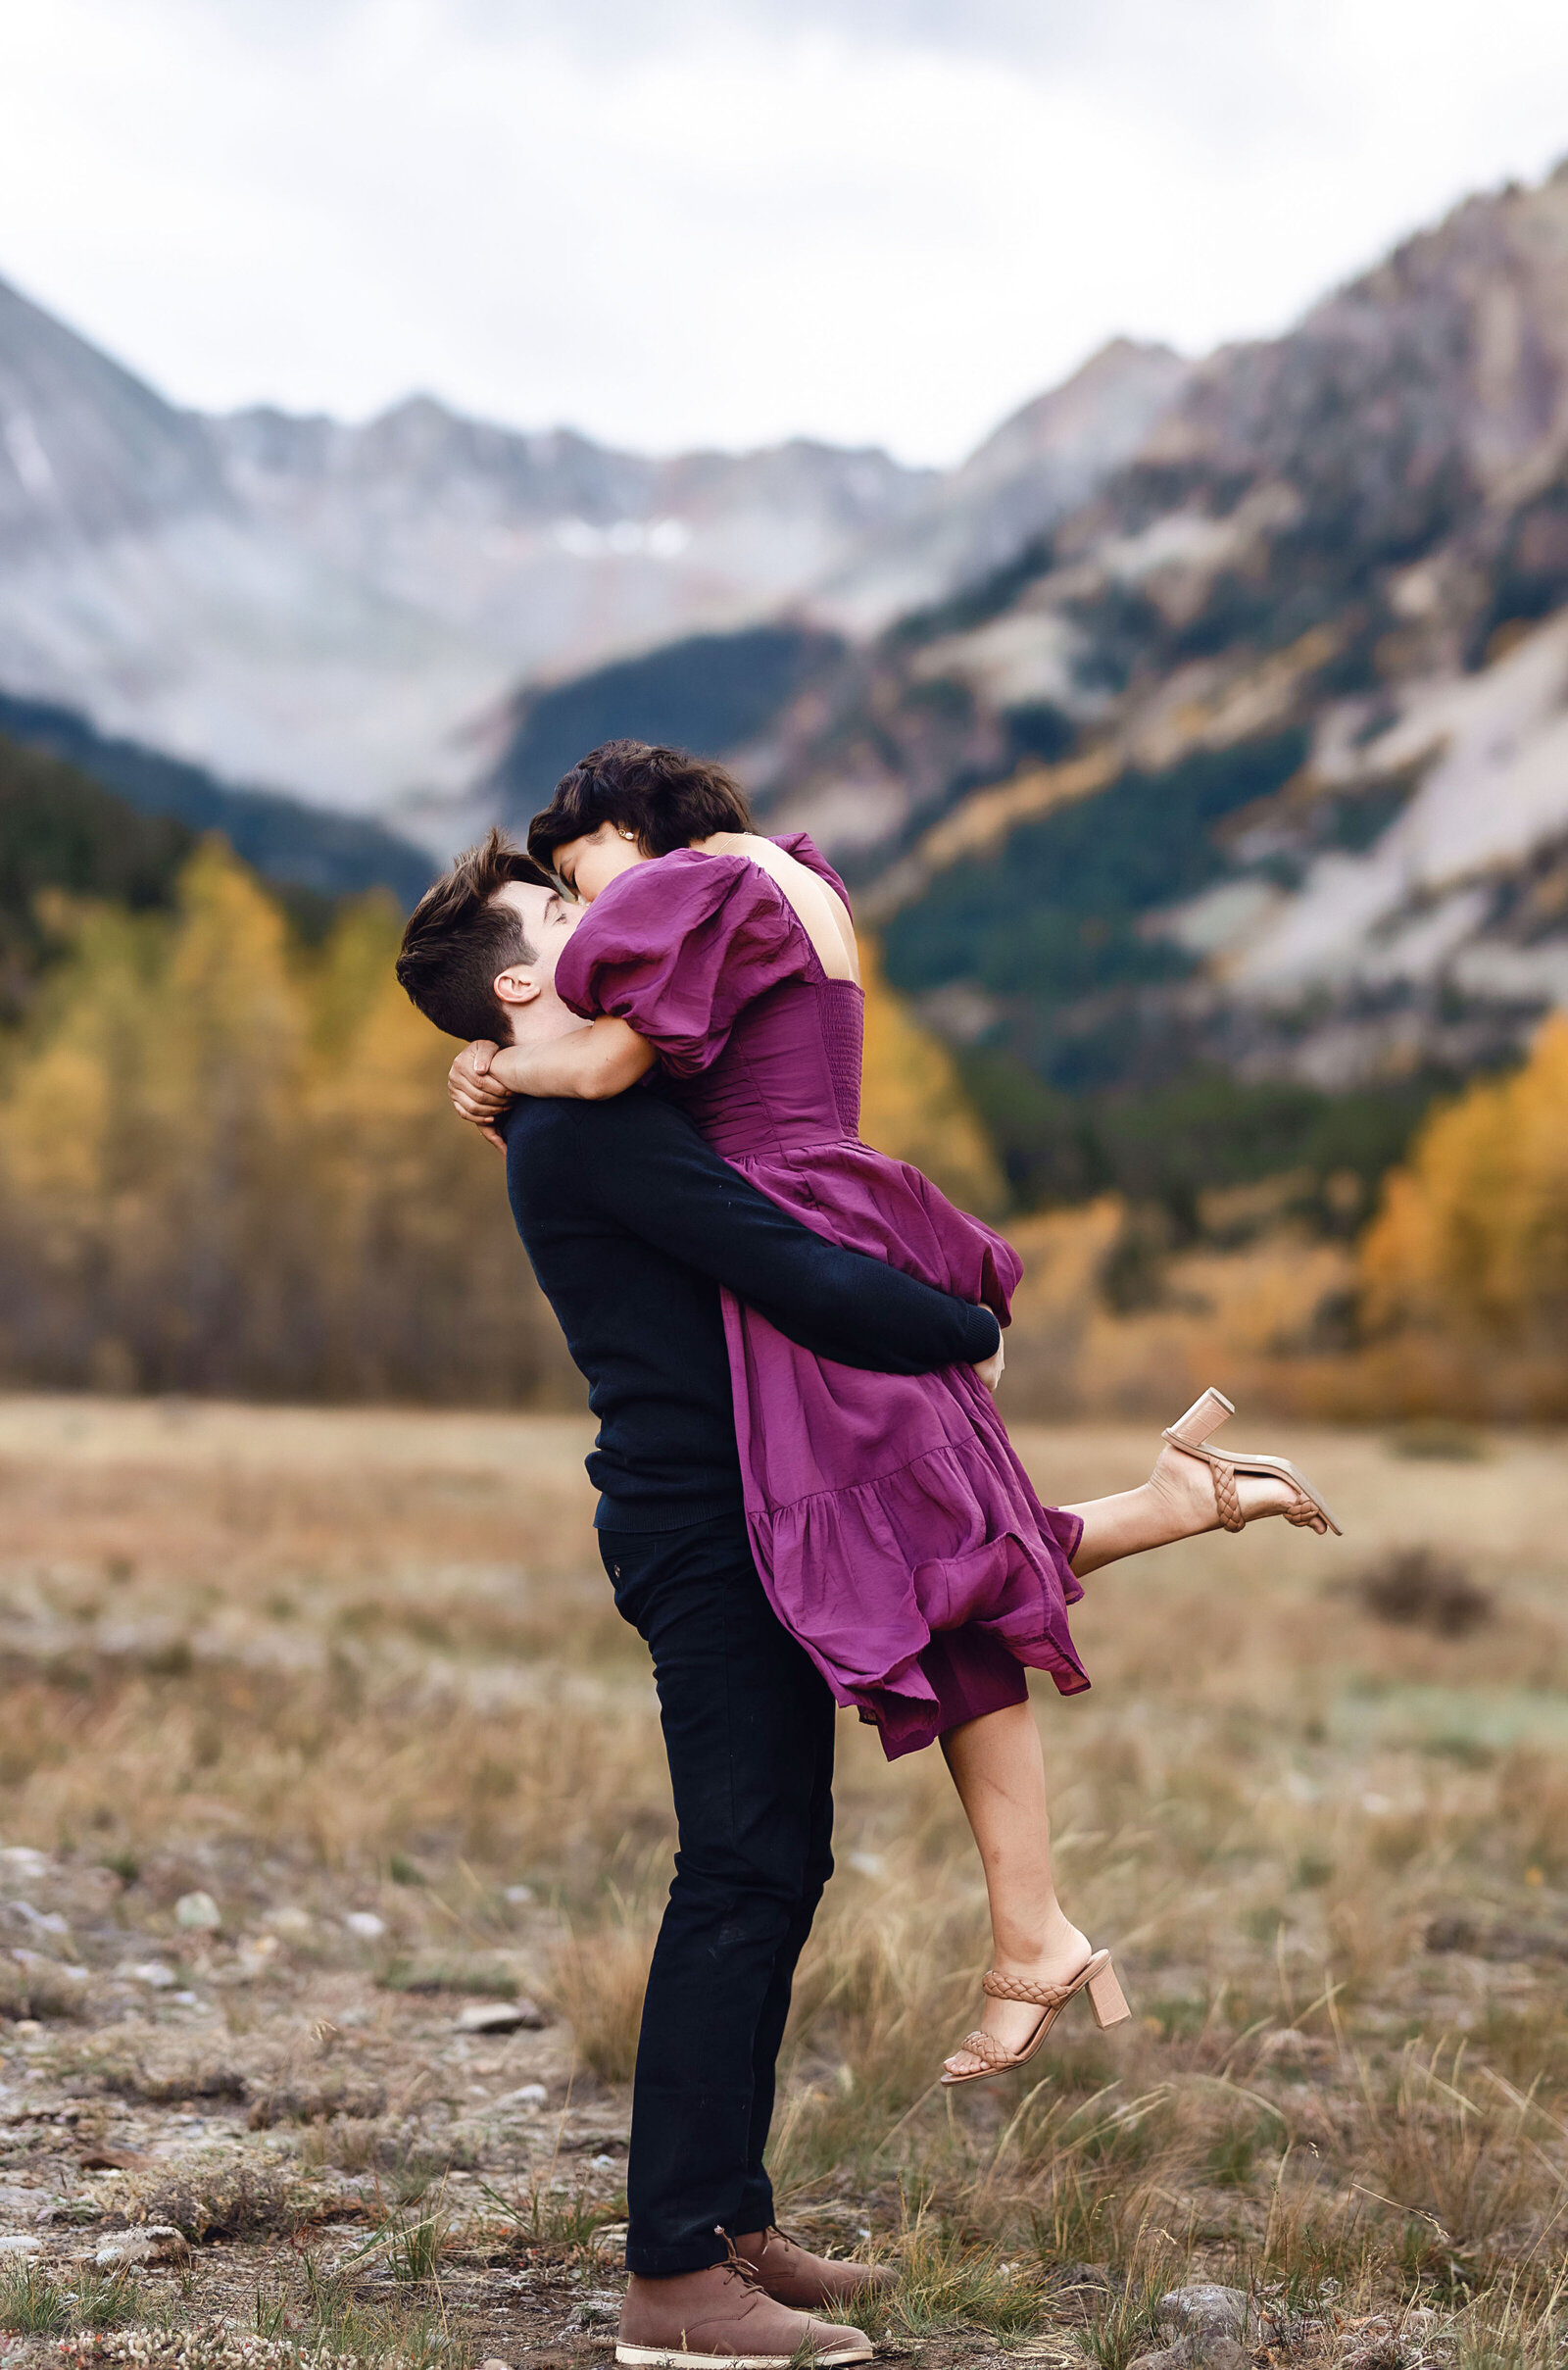 A man lifts up a. woman in a beautiful magenta dress and kisses her with a gorgeous Aspen mountain backdrop,